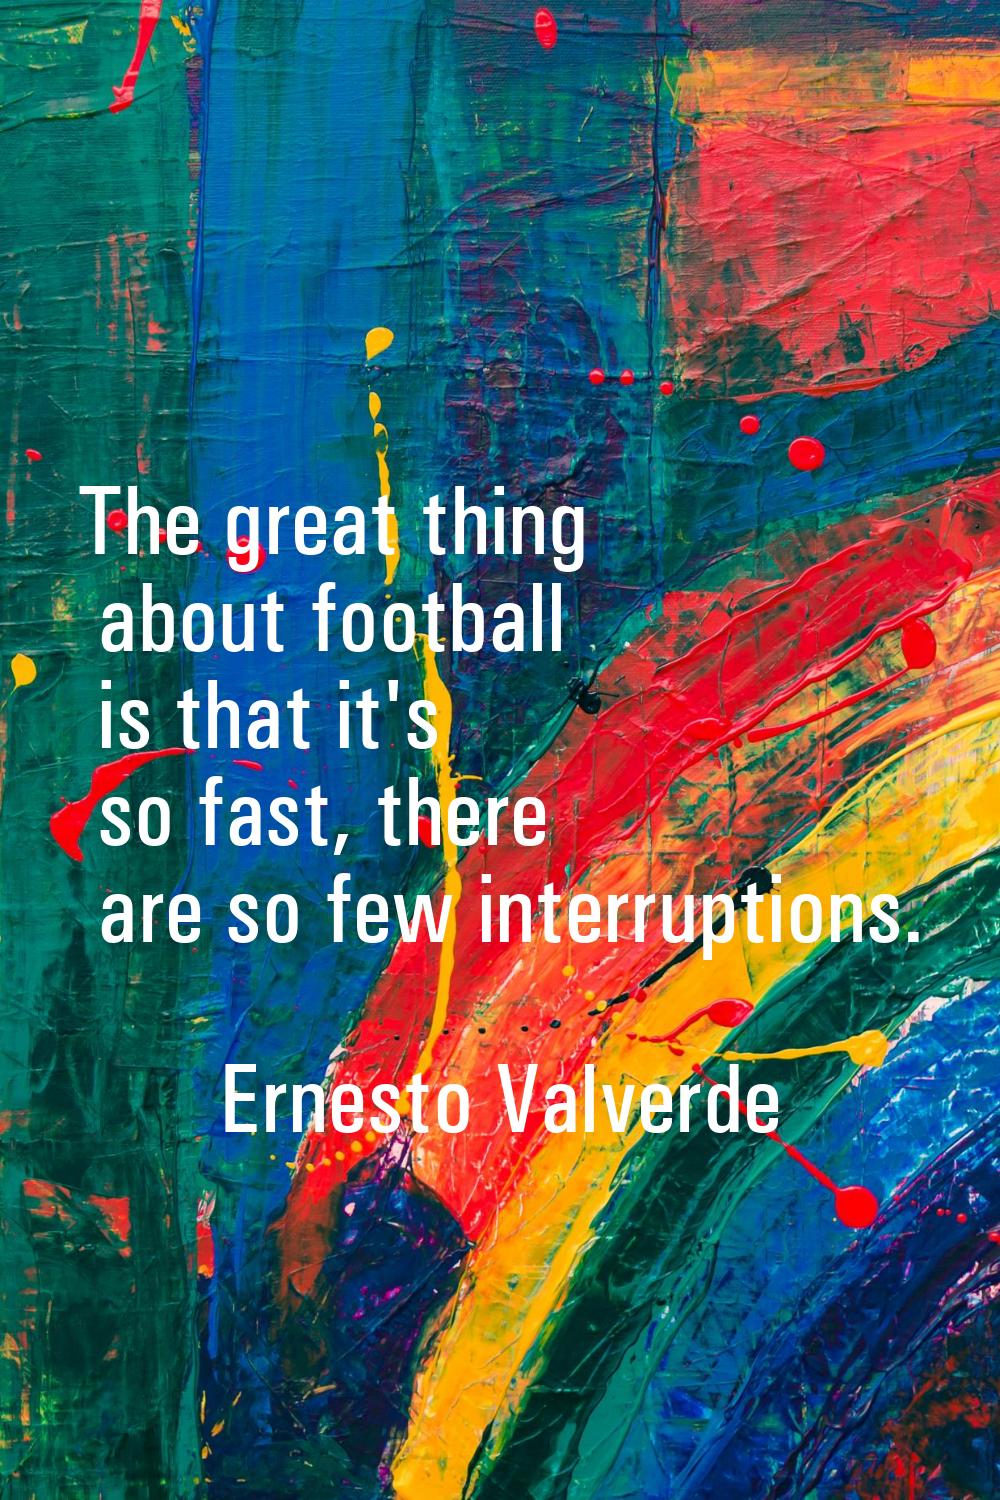 The great thing about football is that it's so fast, there are so few interruptions.